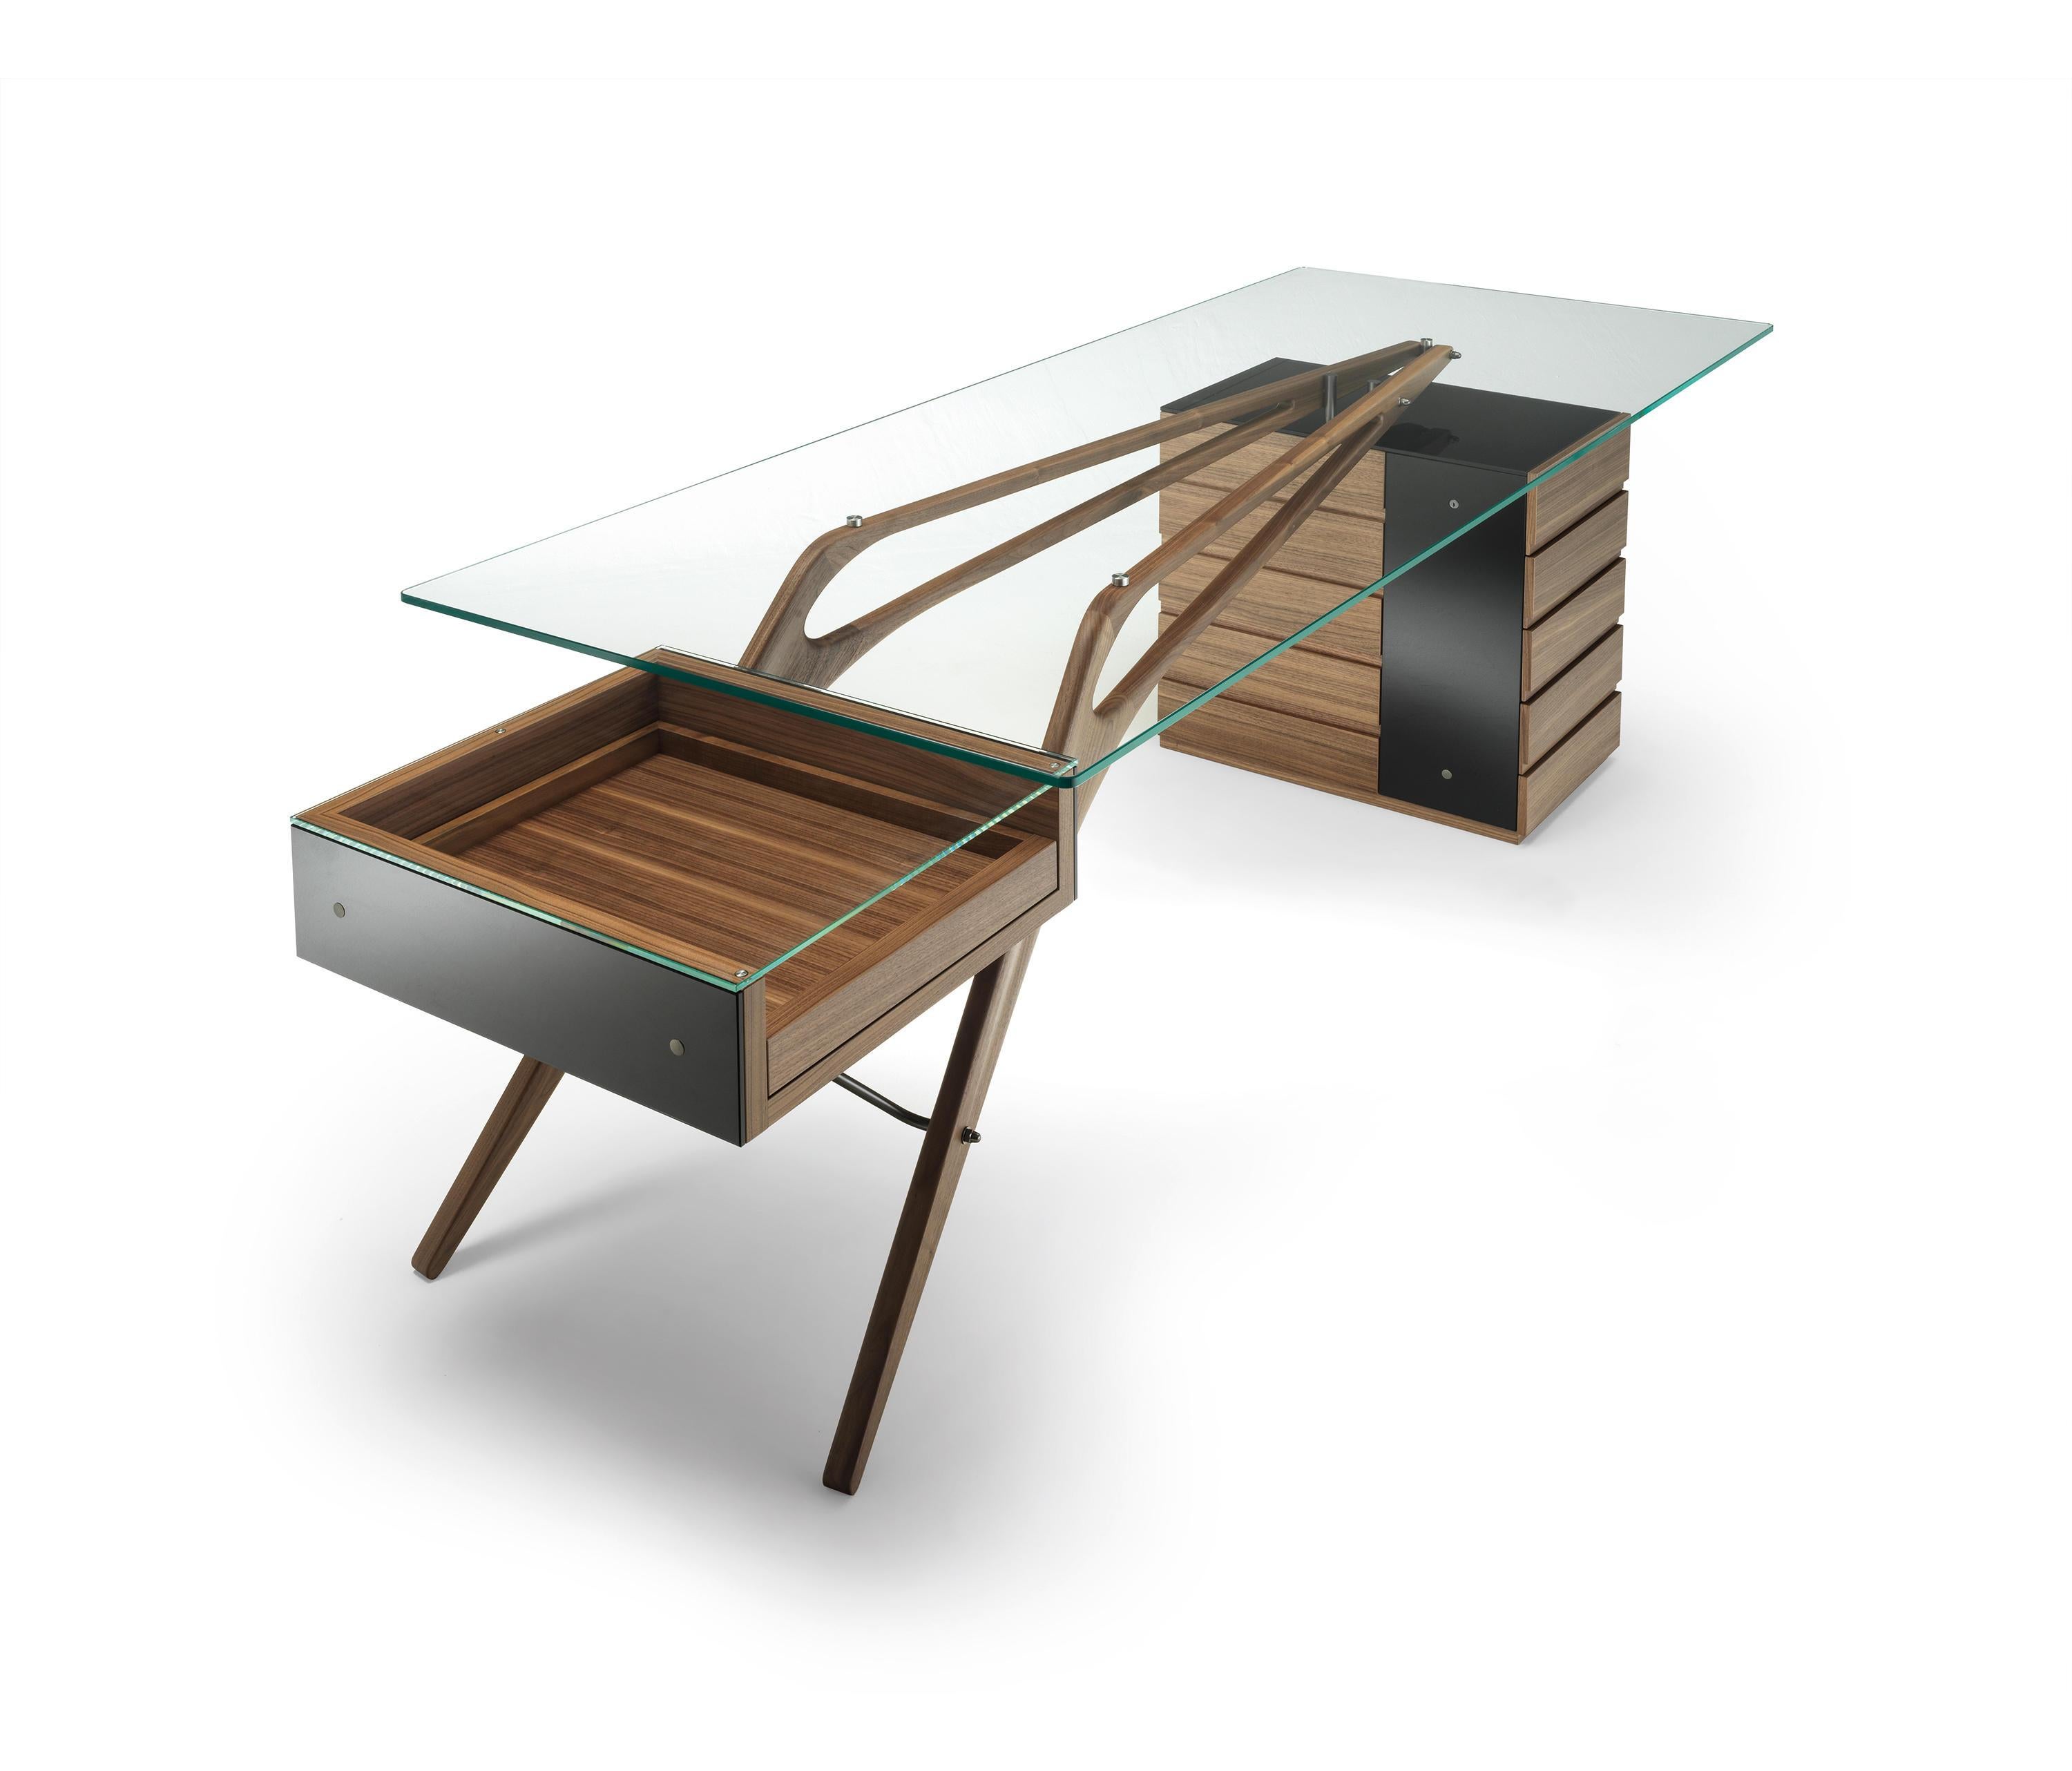 Designed by Carlo Mollino in 1949 for Zanotta, the Cavour Desk forms part of an eccentric yet elegant collection for one of the leaders in Italian industrial design. All soaring lines and alpine finishes, this desk embodies many of the tenets of